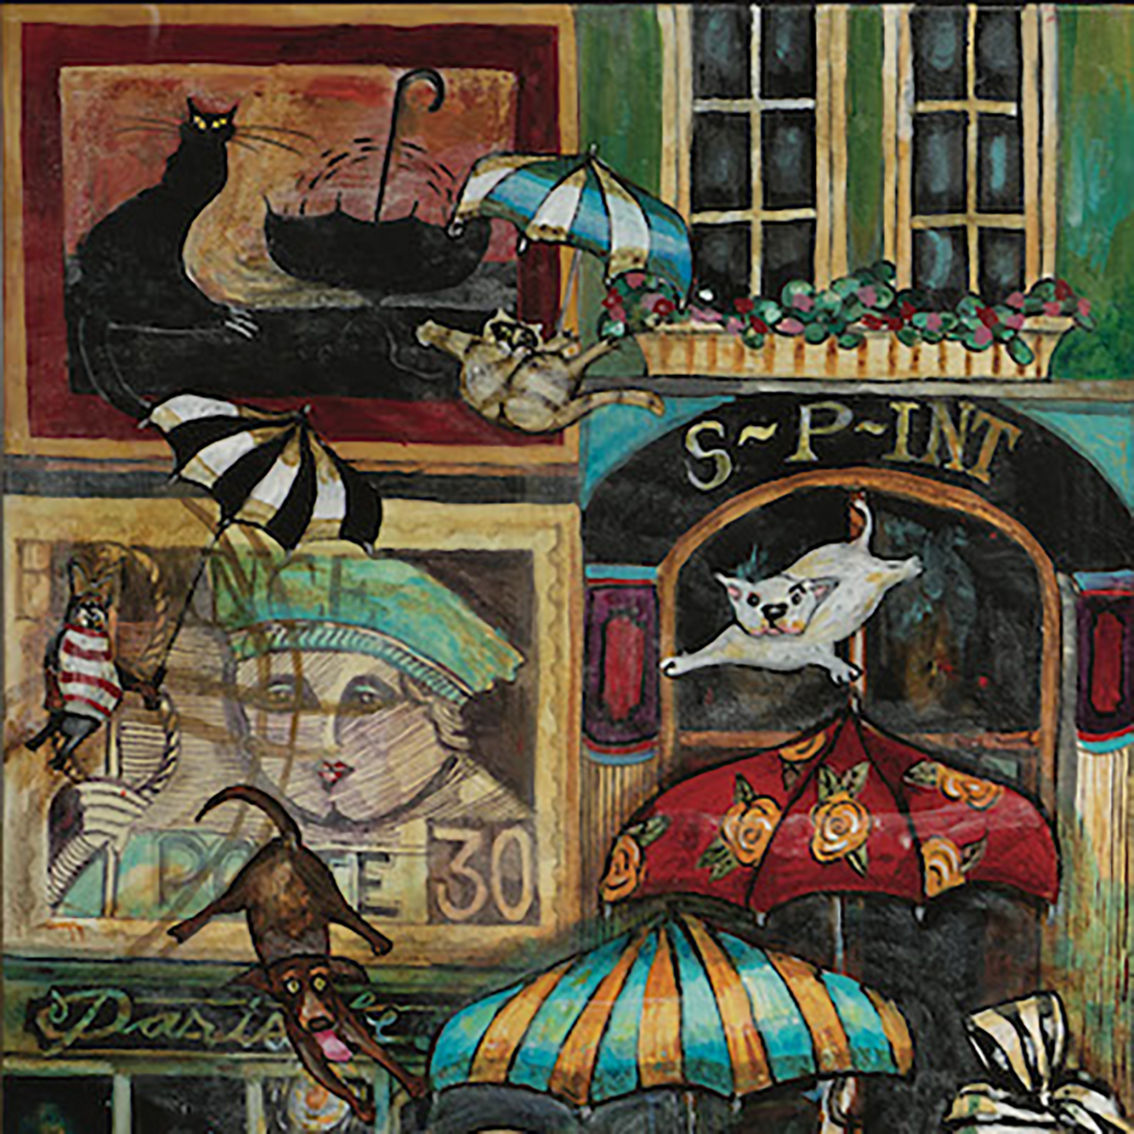 Hart Puzzles Raining Cats and Dogs in Paris 1,000 pc. Puzzle - Image 5 of 6